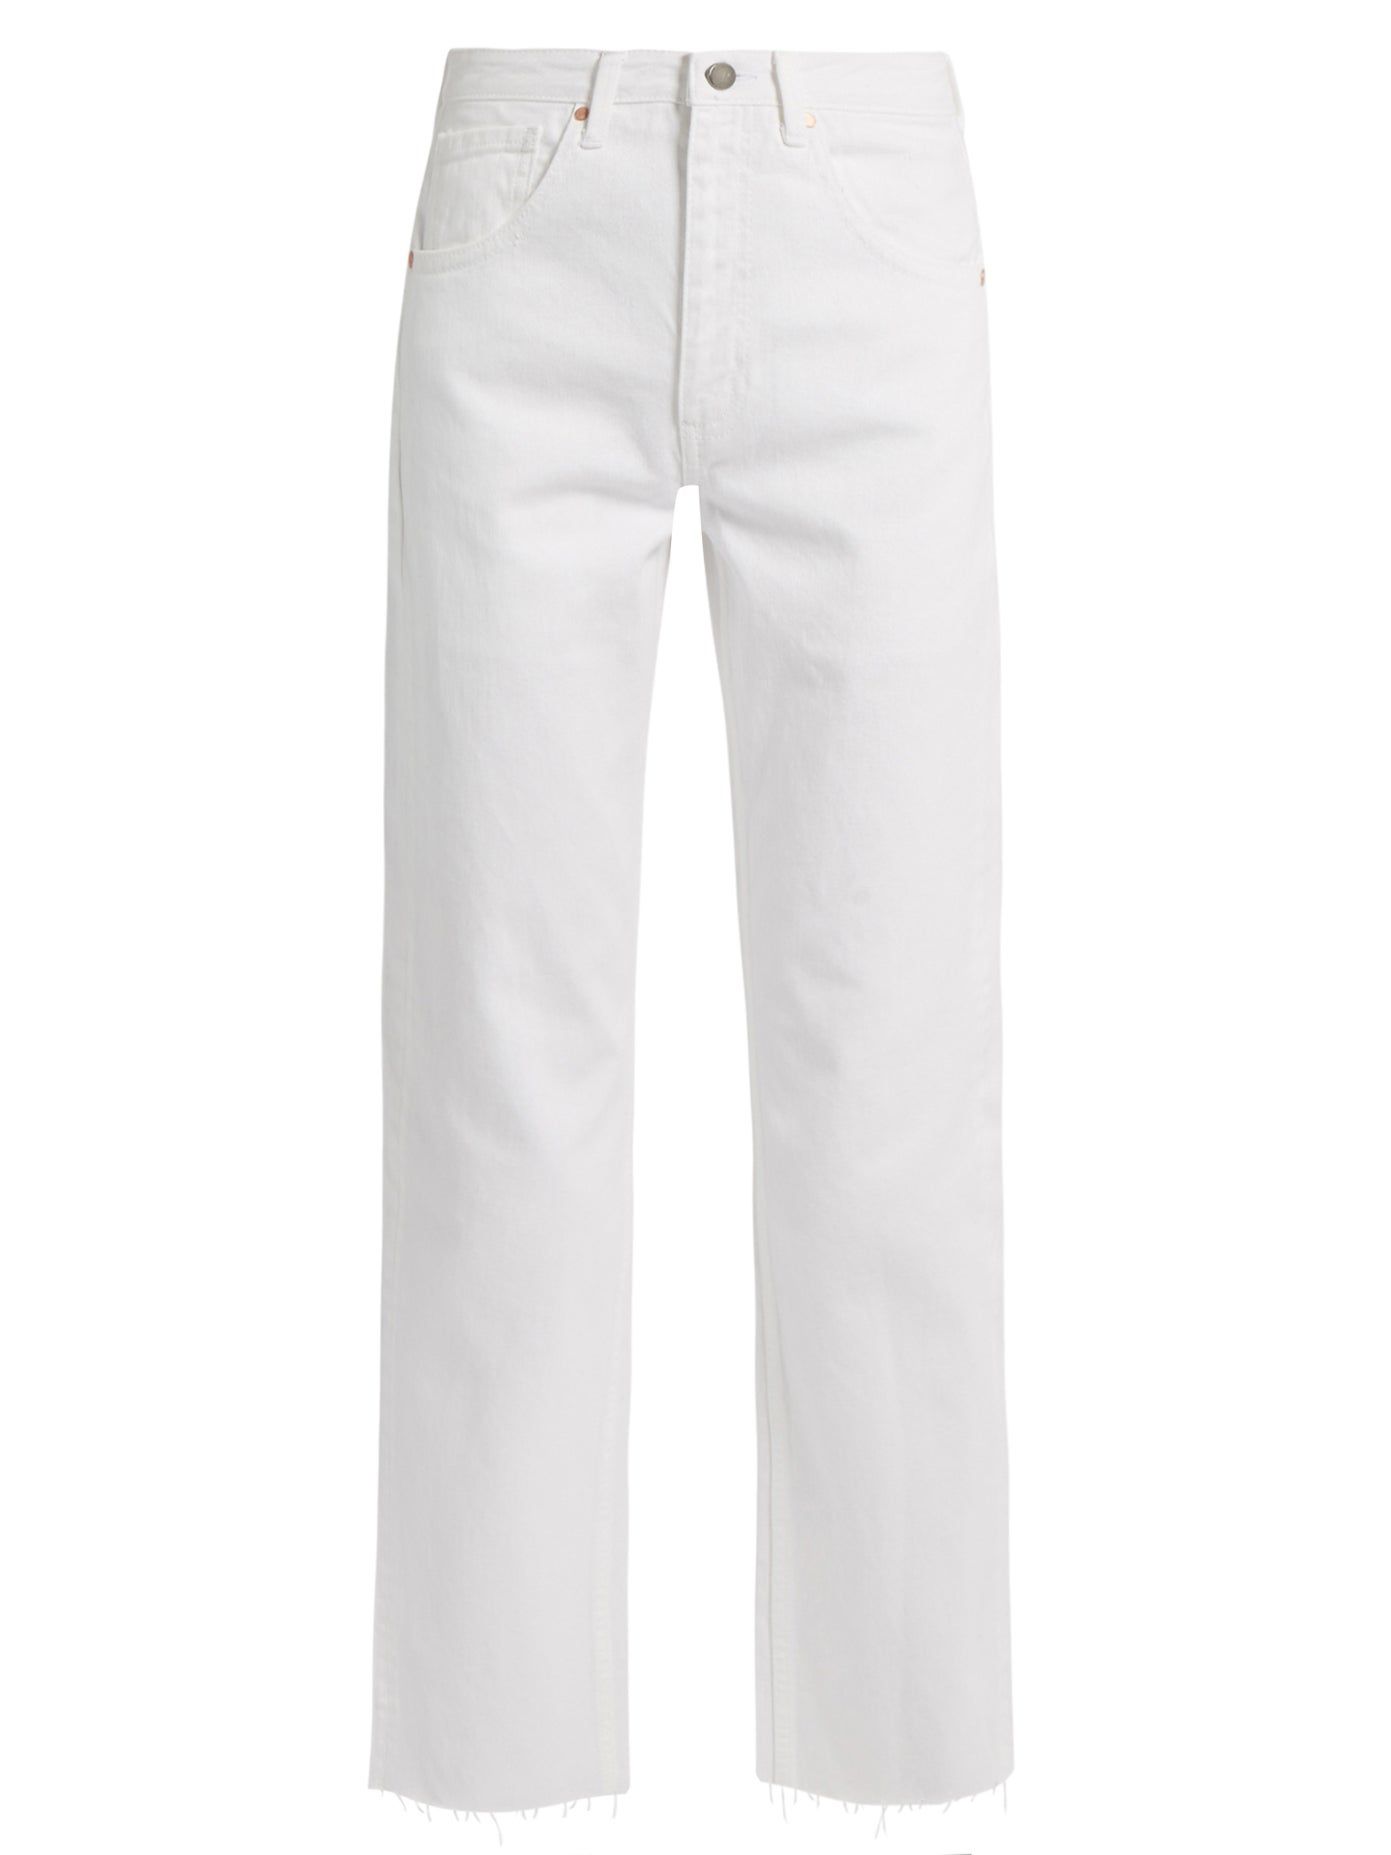 Best white jeans for women: every fit 